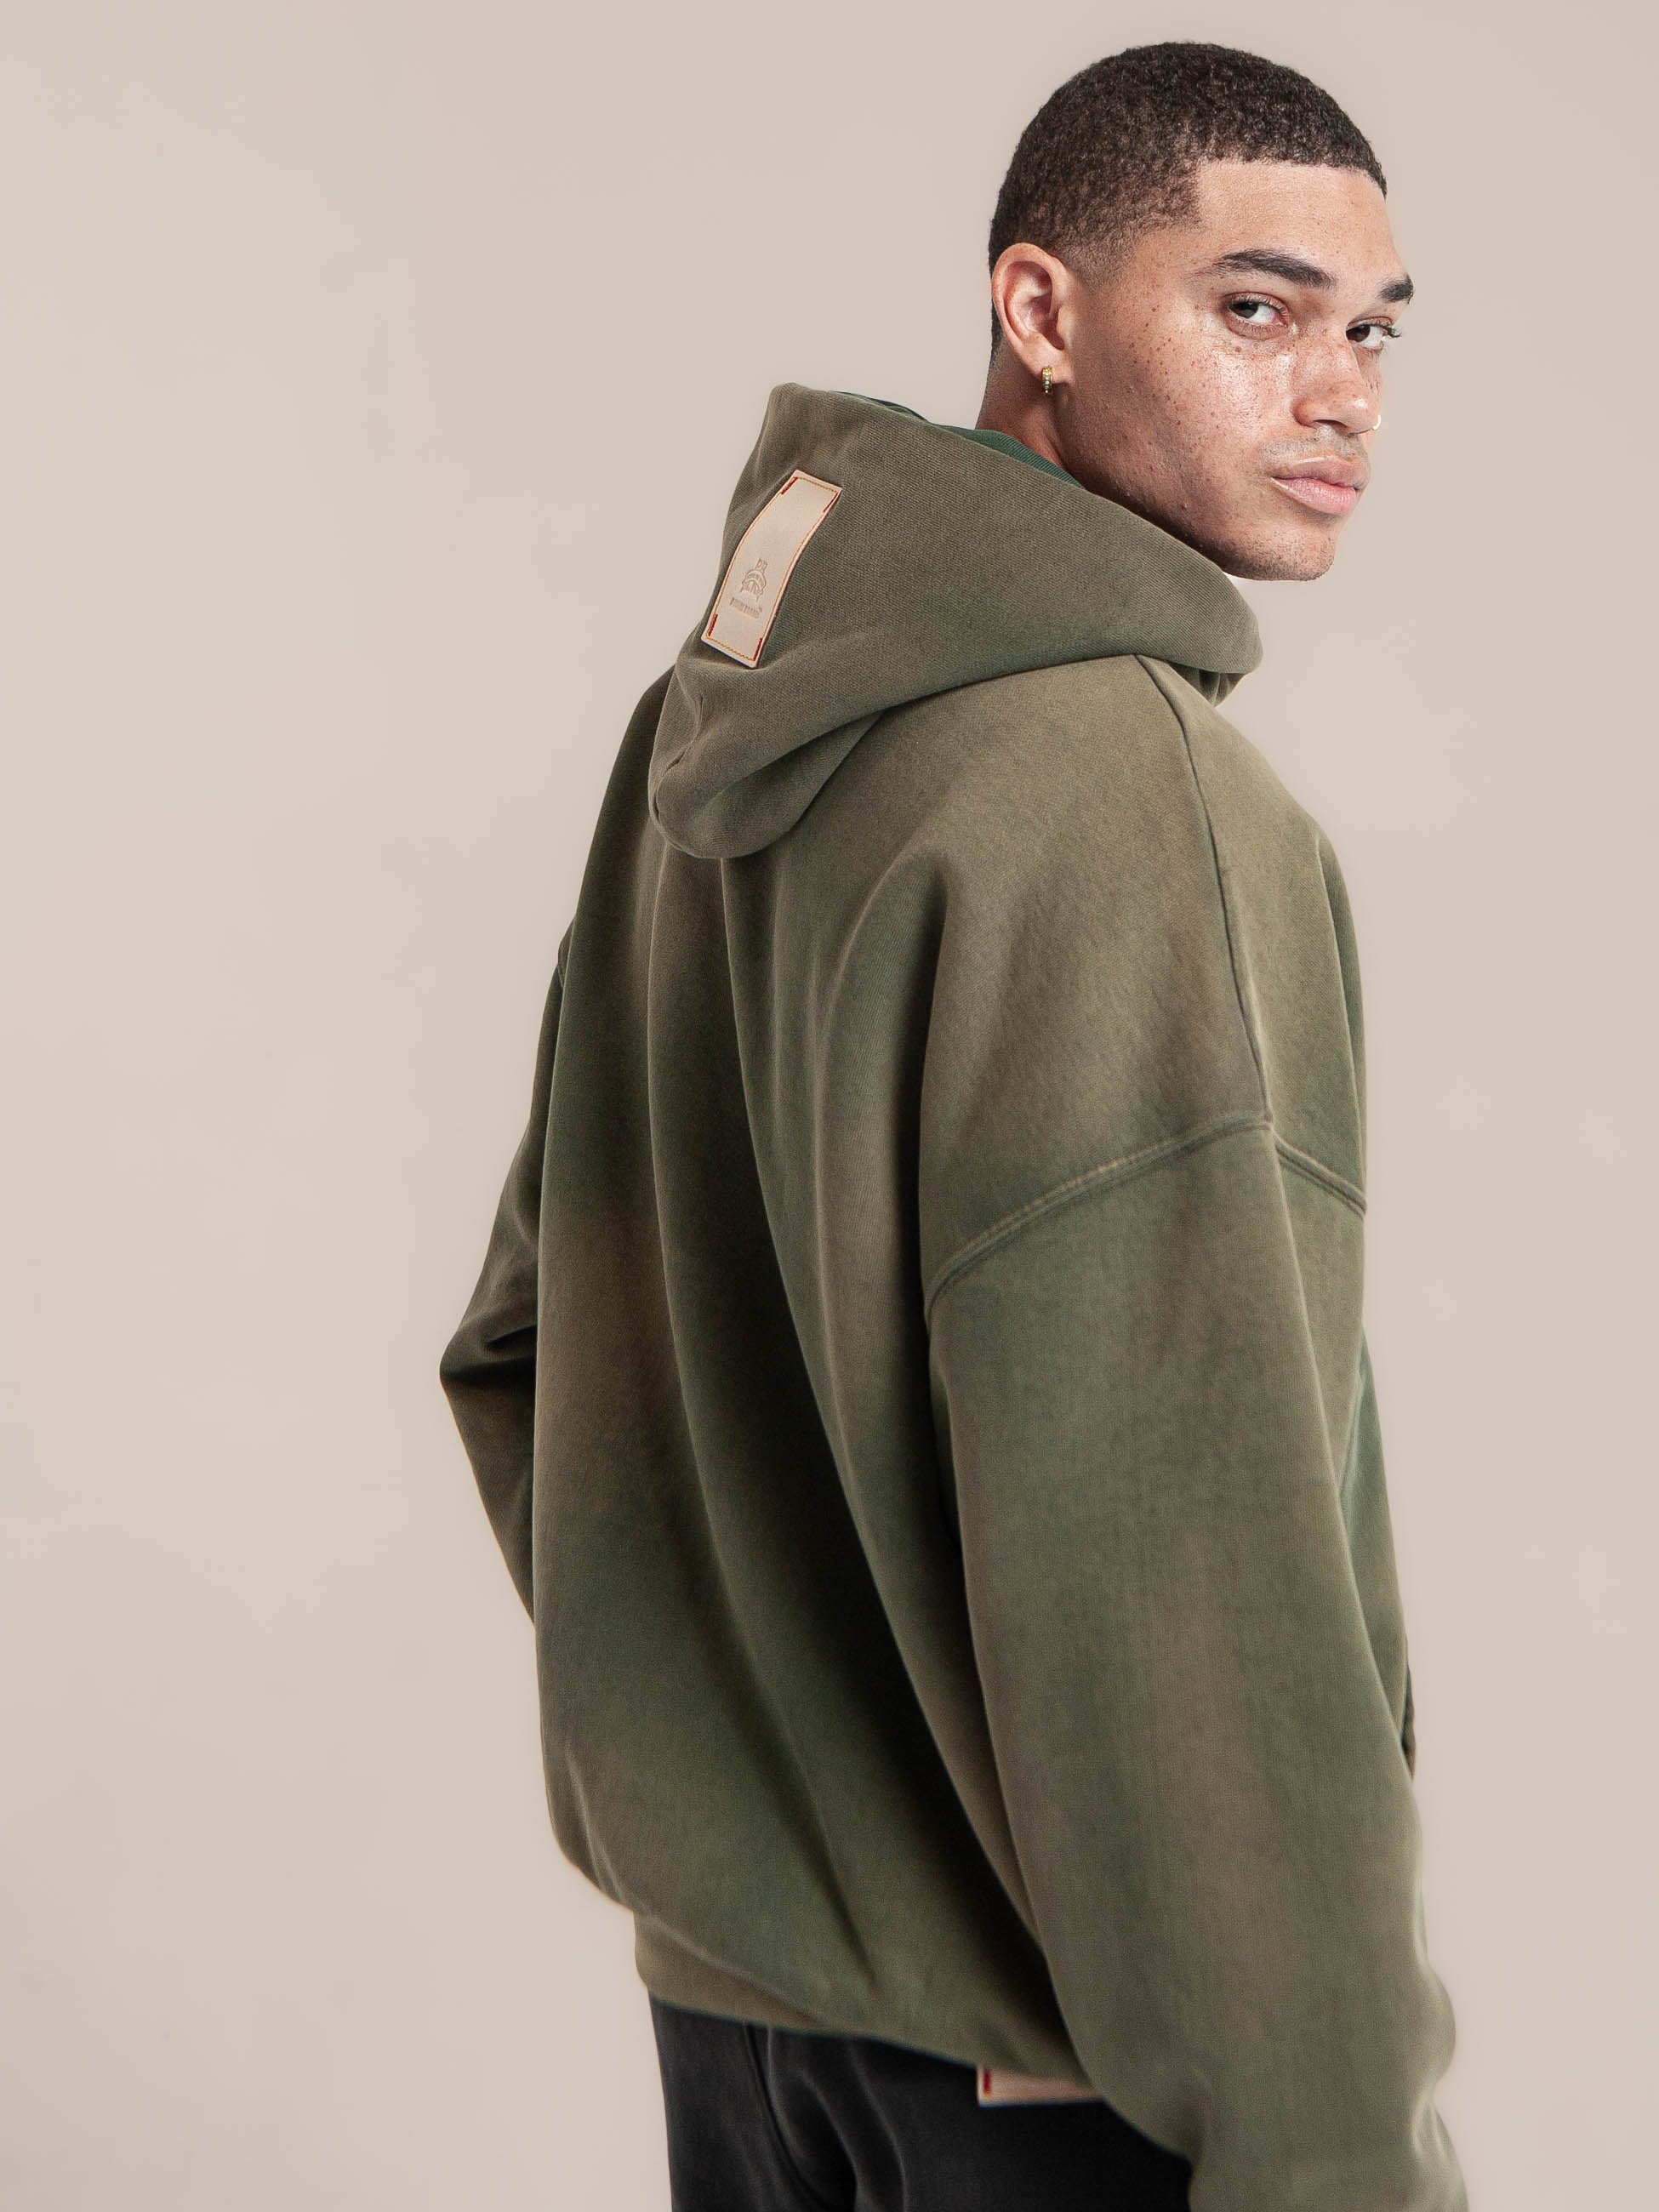 male model wears Publik Brand Double Layered Hoodie Reseda Green Heavyweight Fleece, all made in USA, turning around and looking for the view